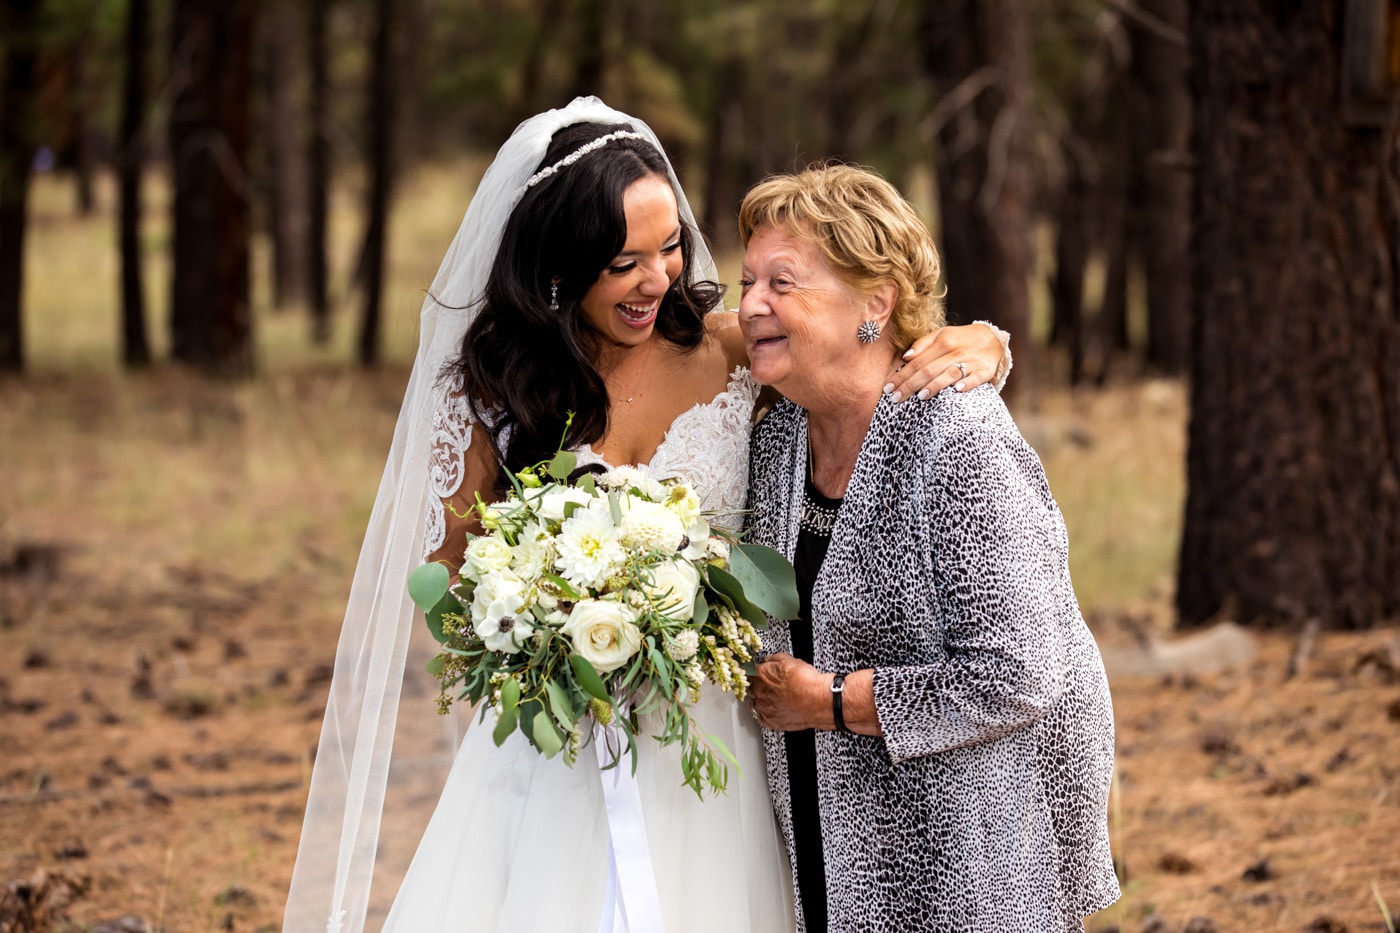 Bride smiling with arm around matriarch outside